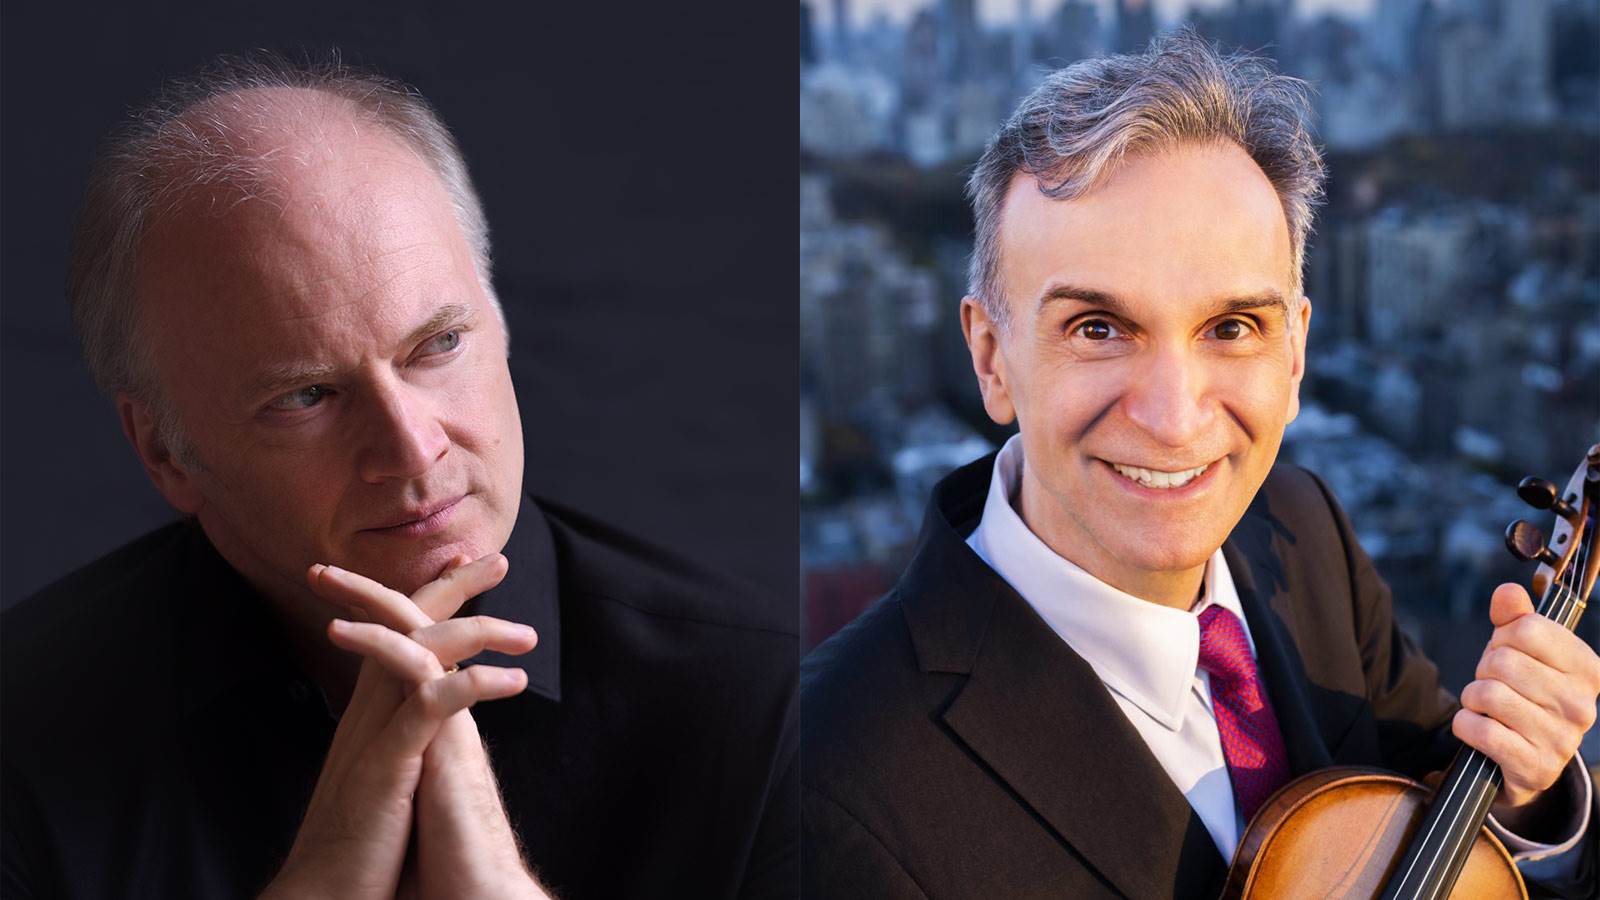 Gianandrea Noseda with hands and chin and Gil Shamham holding violin in front of city scape